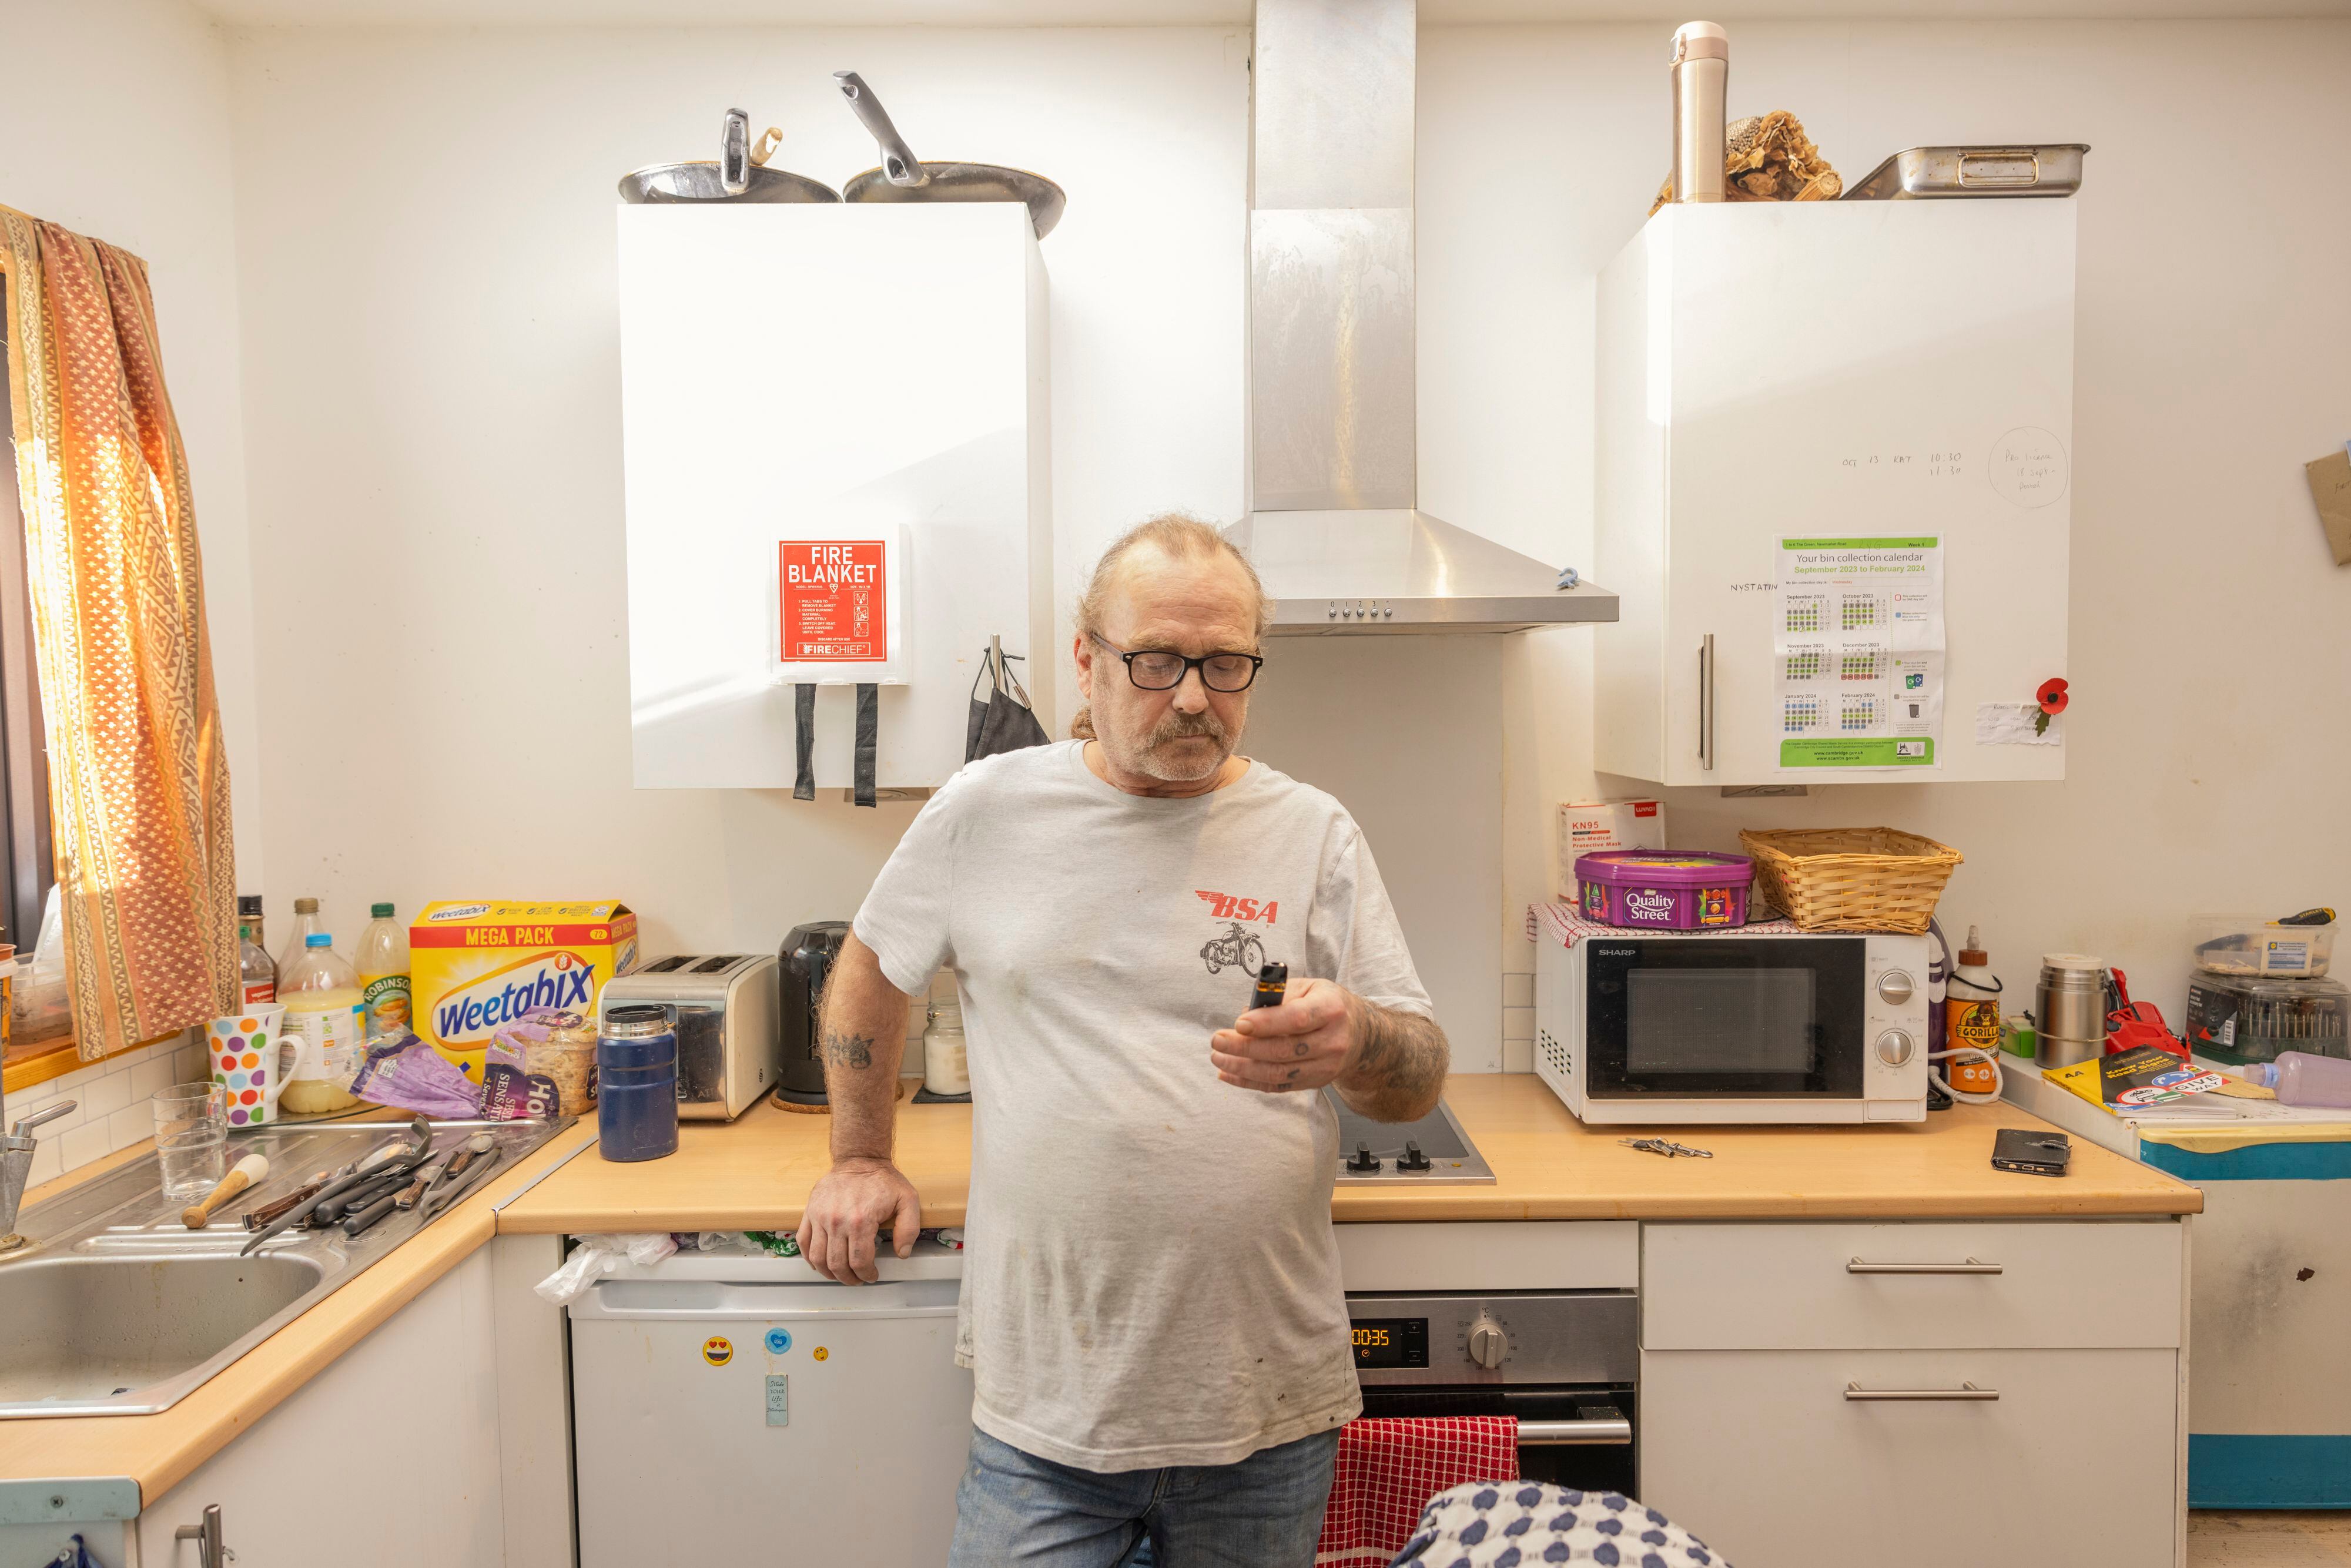 Trevor, one of the tiny home residents, in his kitchen.